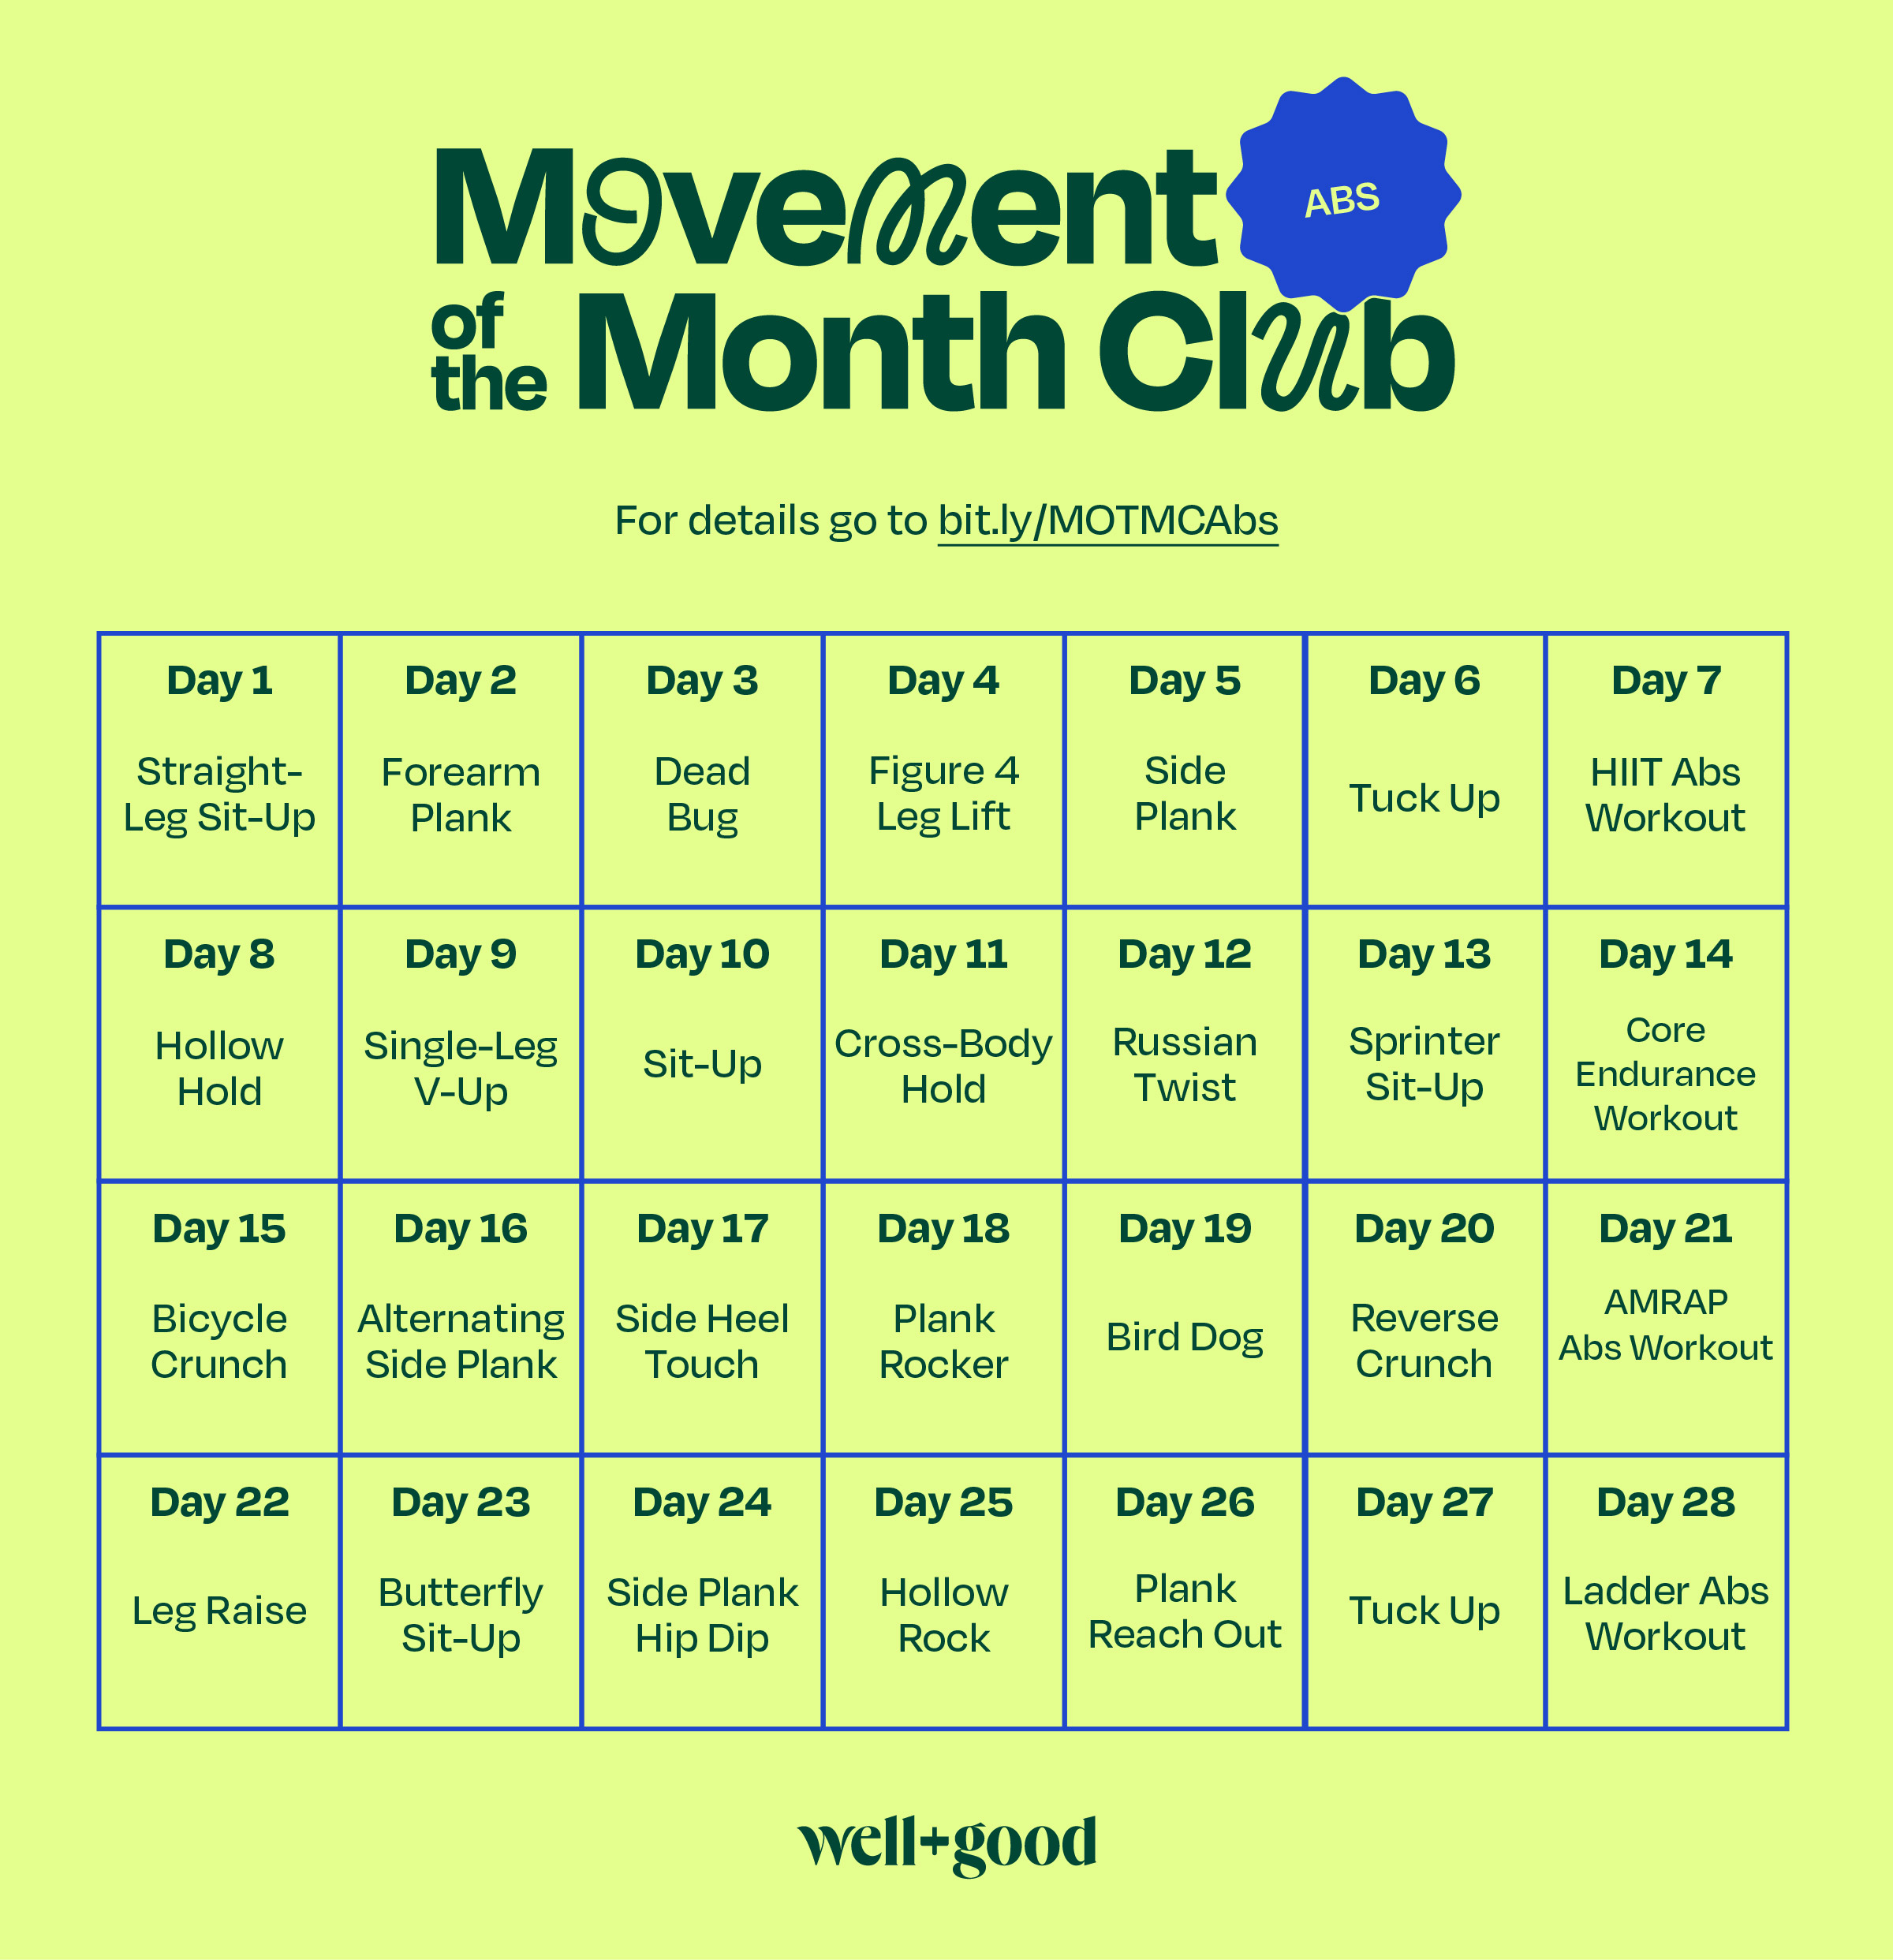 the movement of the month club calendar for the abs challenge, a 4-week fitness challenge with different moves every day, followed by 4 unique workouts each Sunday